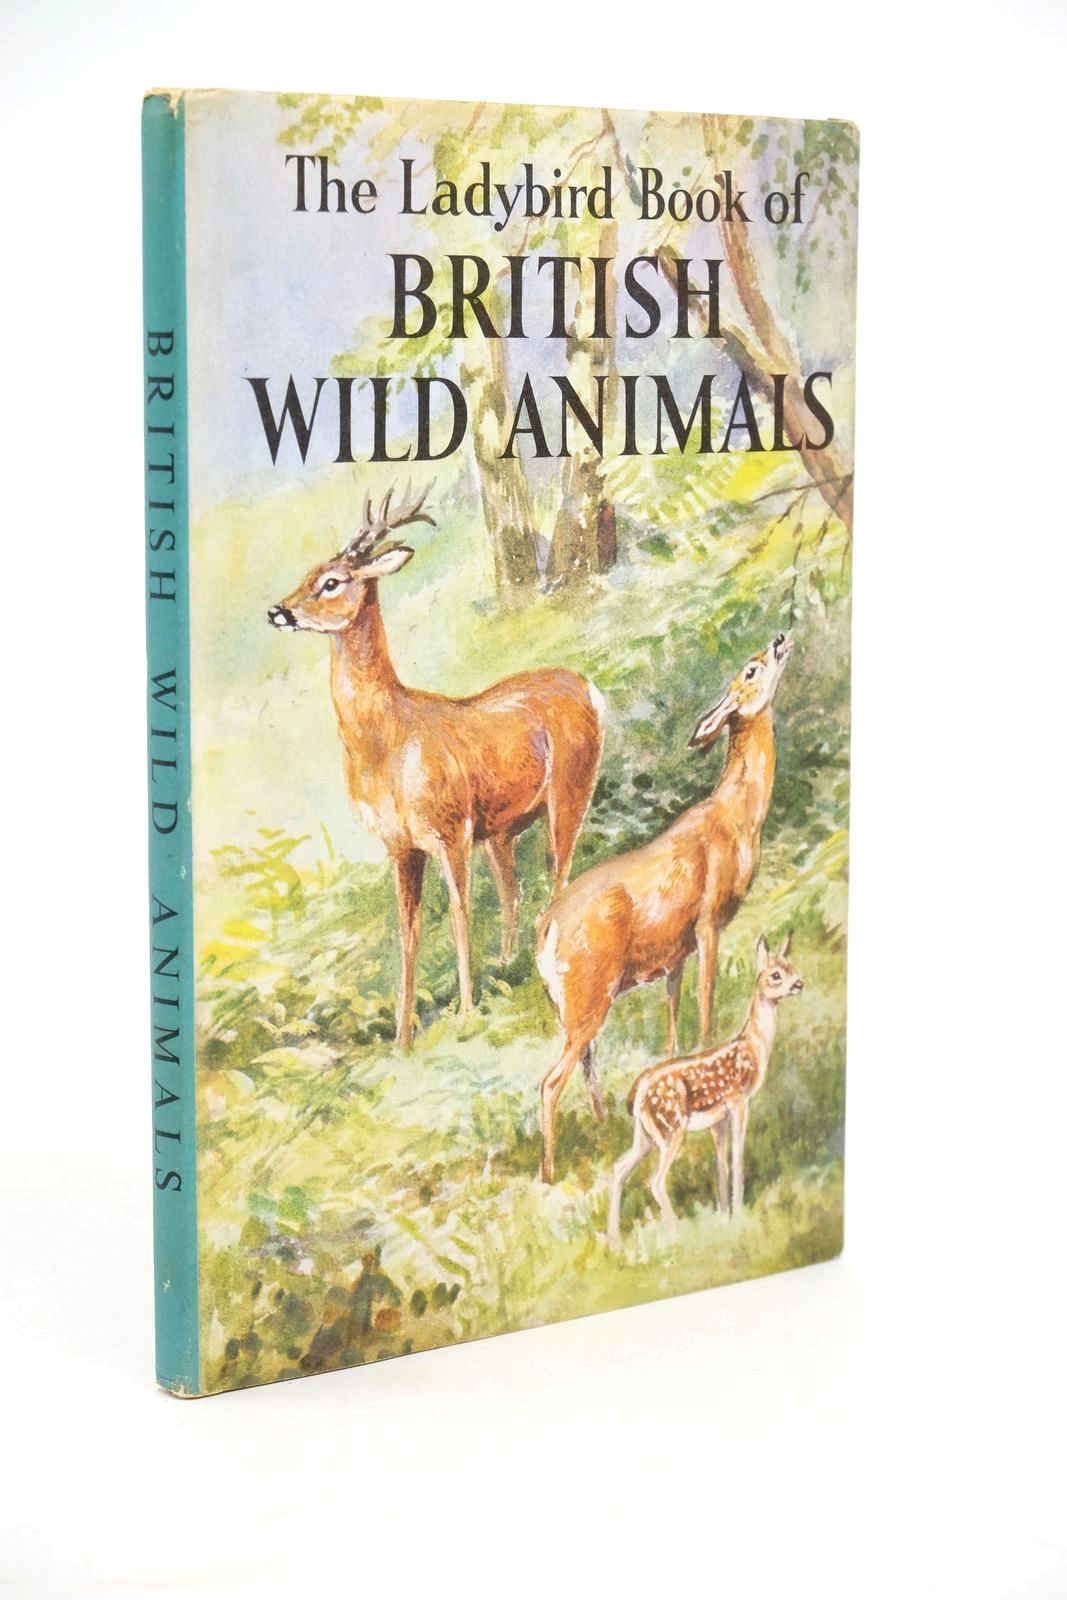 Photo of THE LADYBIRD BOOK OF BRITISH WILD ANIMALS written by Cansdale, George illustrated by Green, Roland published by Wills & Hepworth Ltd. (STOCK CODE: 1323138)  for sale by Stella & Rose's Books